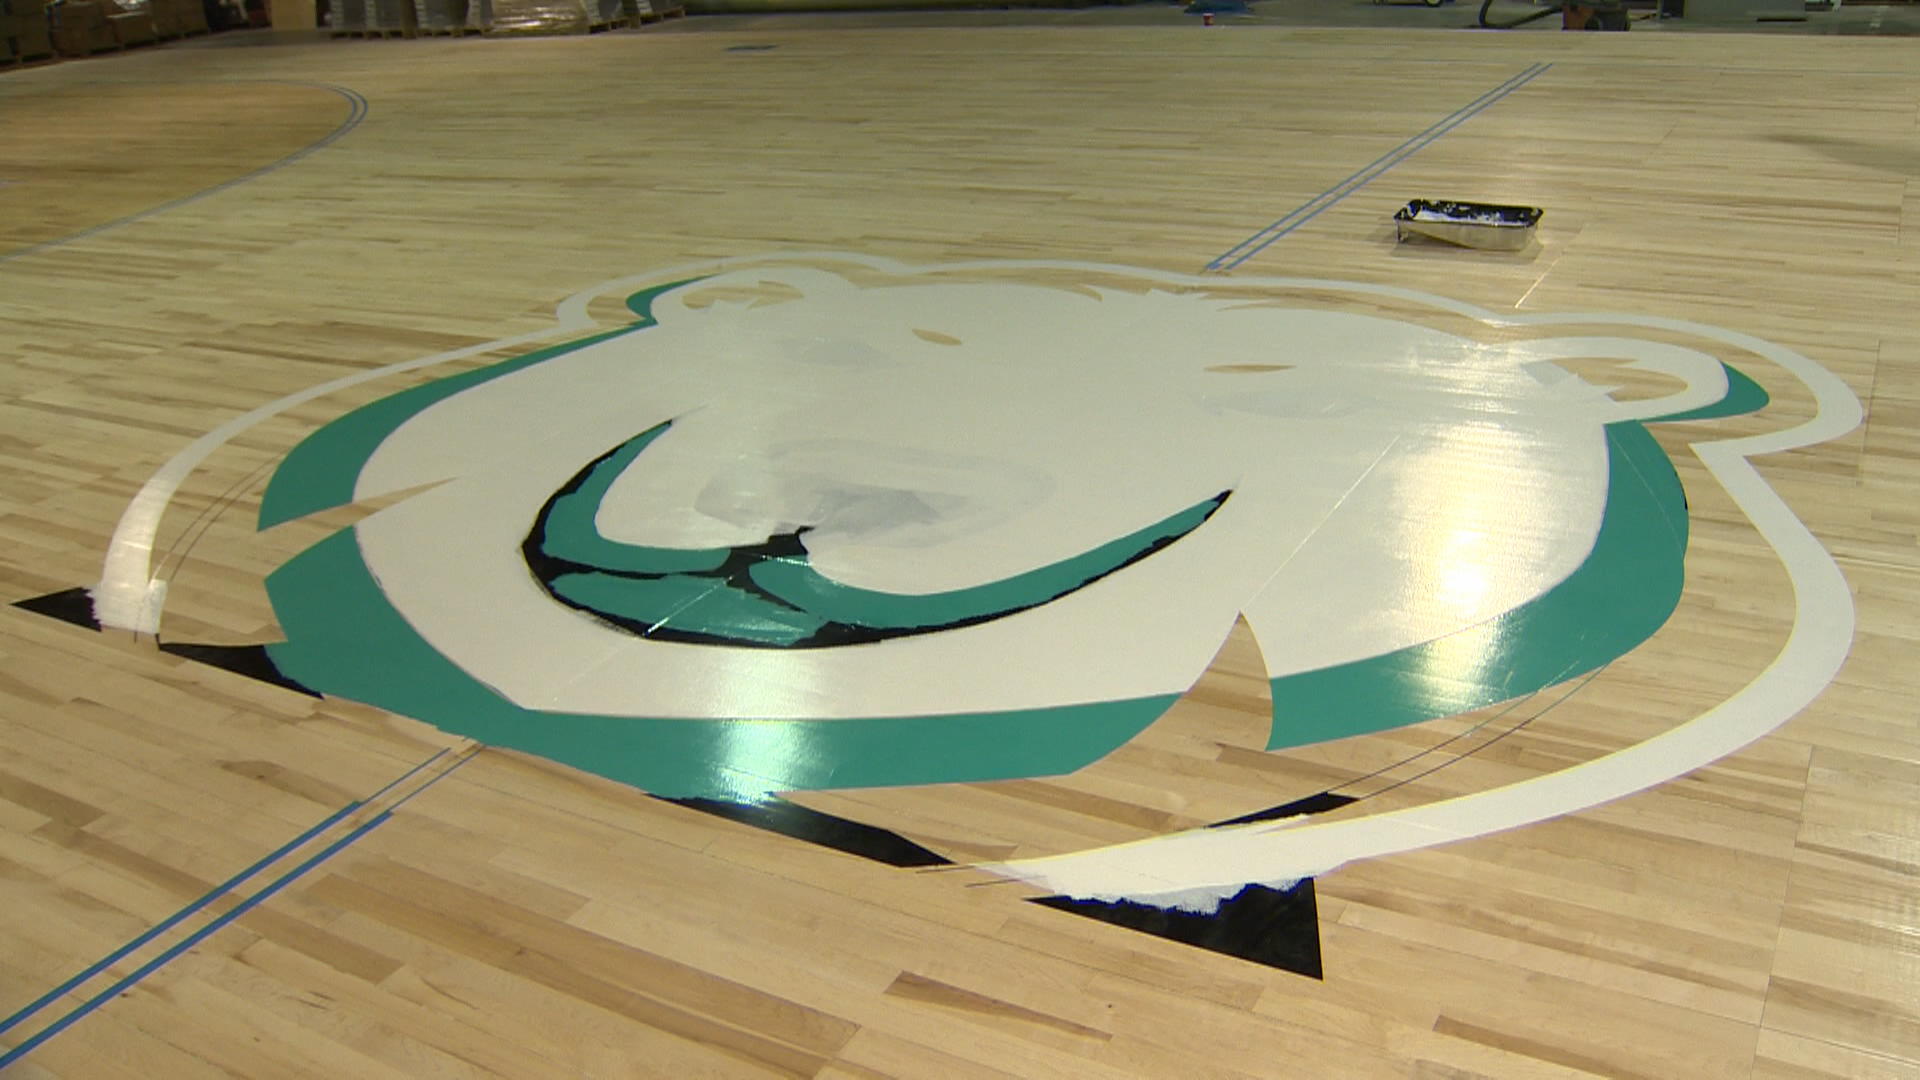 From March Madness to Winnipeg: Sea Bears welcome new basketball court